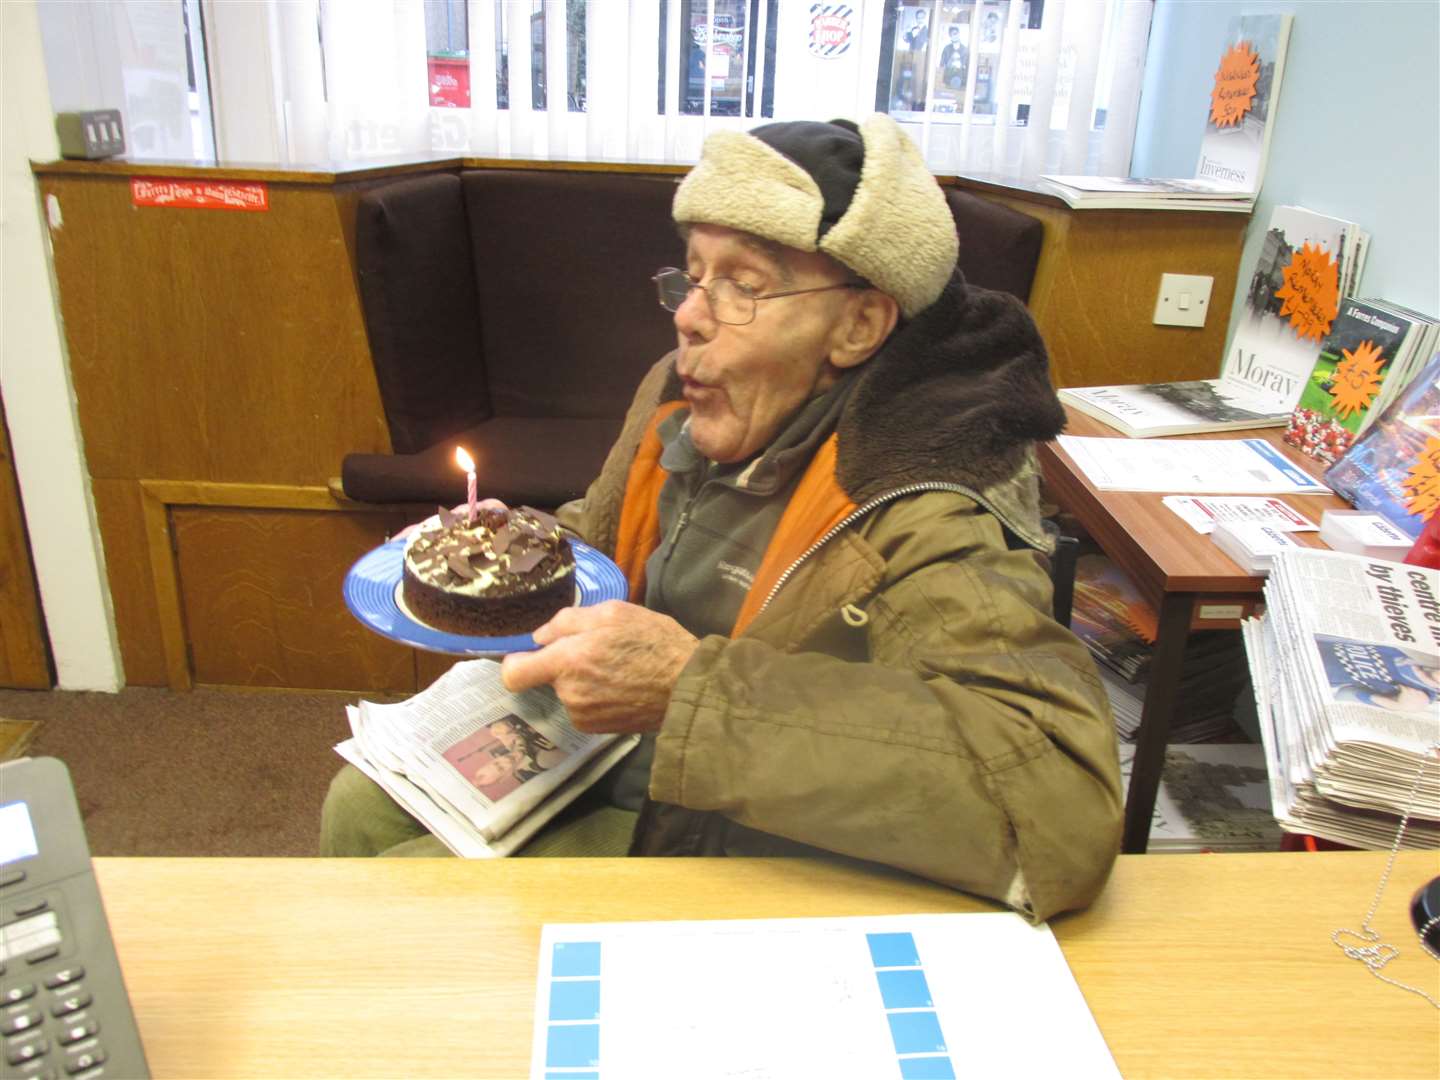 Les celebrating a birthday in the old Gazette office.